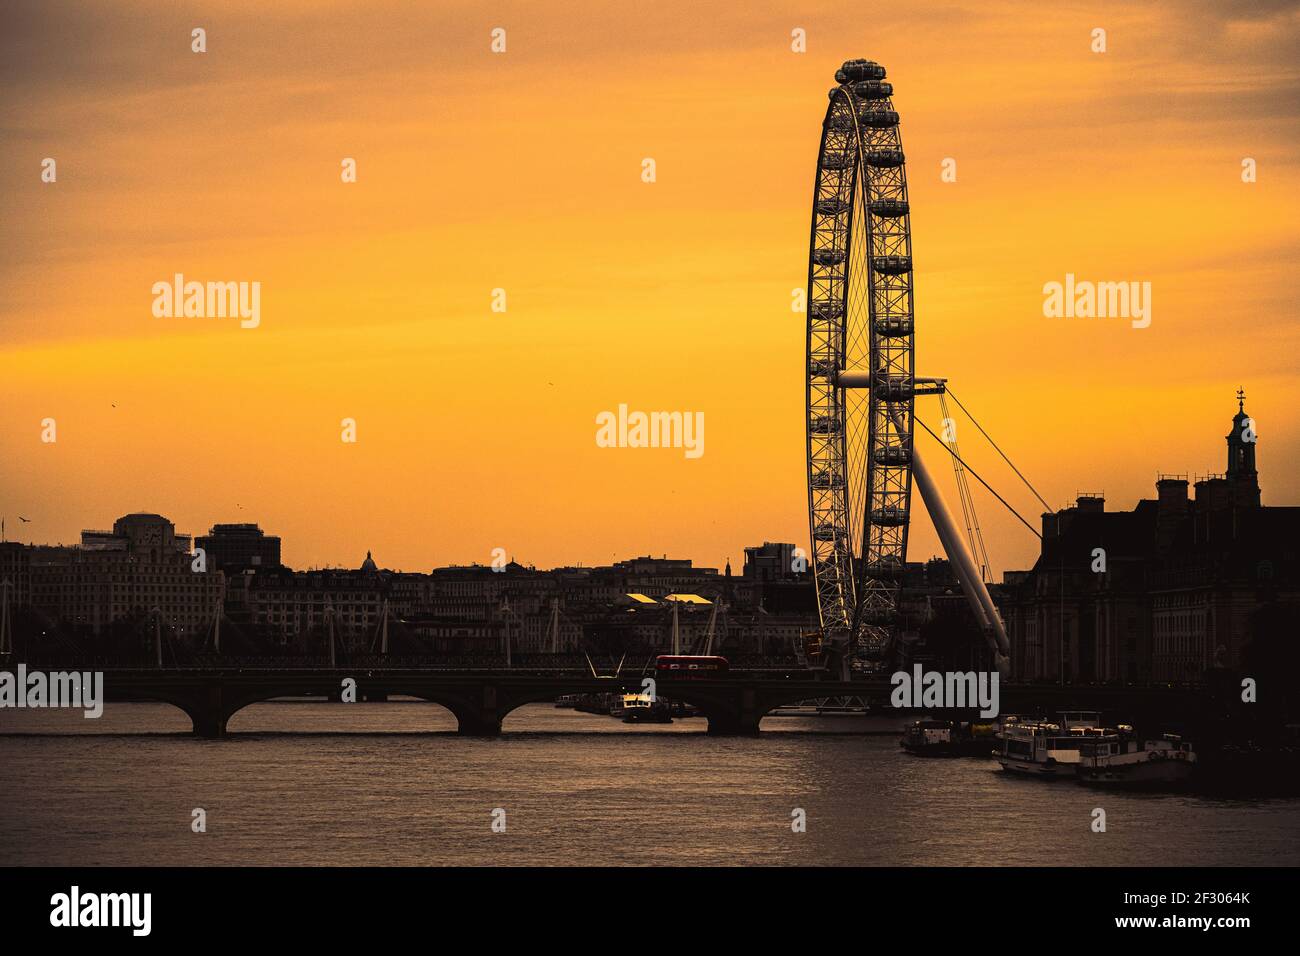 London UK February 2021 Amazing late sunset over London, silhouettes of the buildings and the London eye contrasting the dark orange sky. Red double d Stock Photo